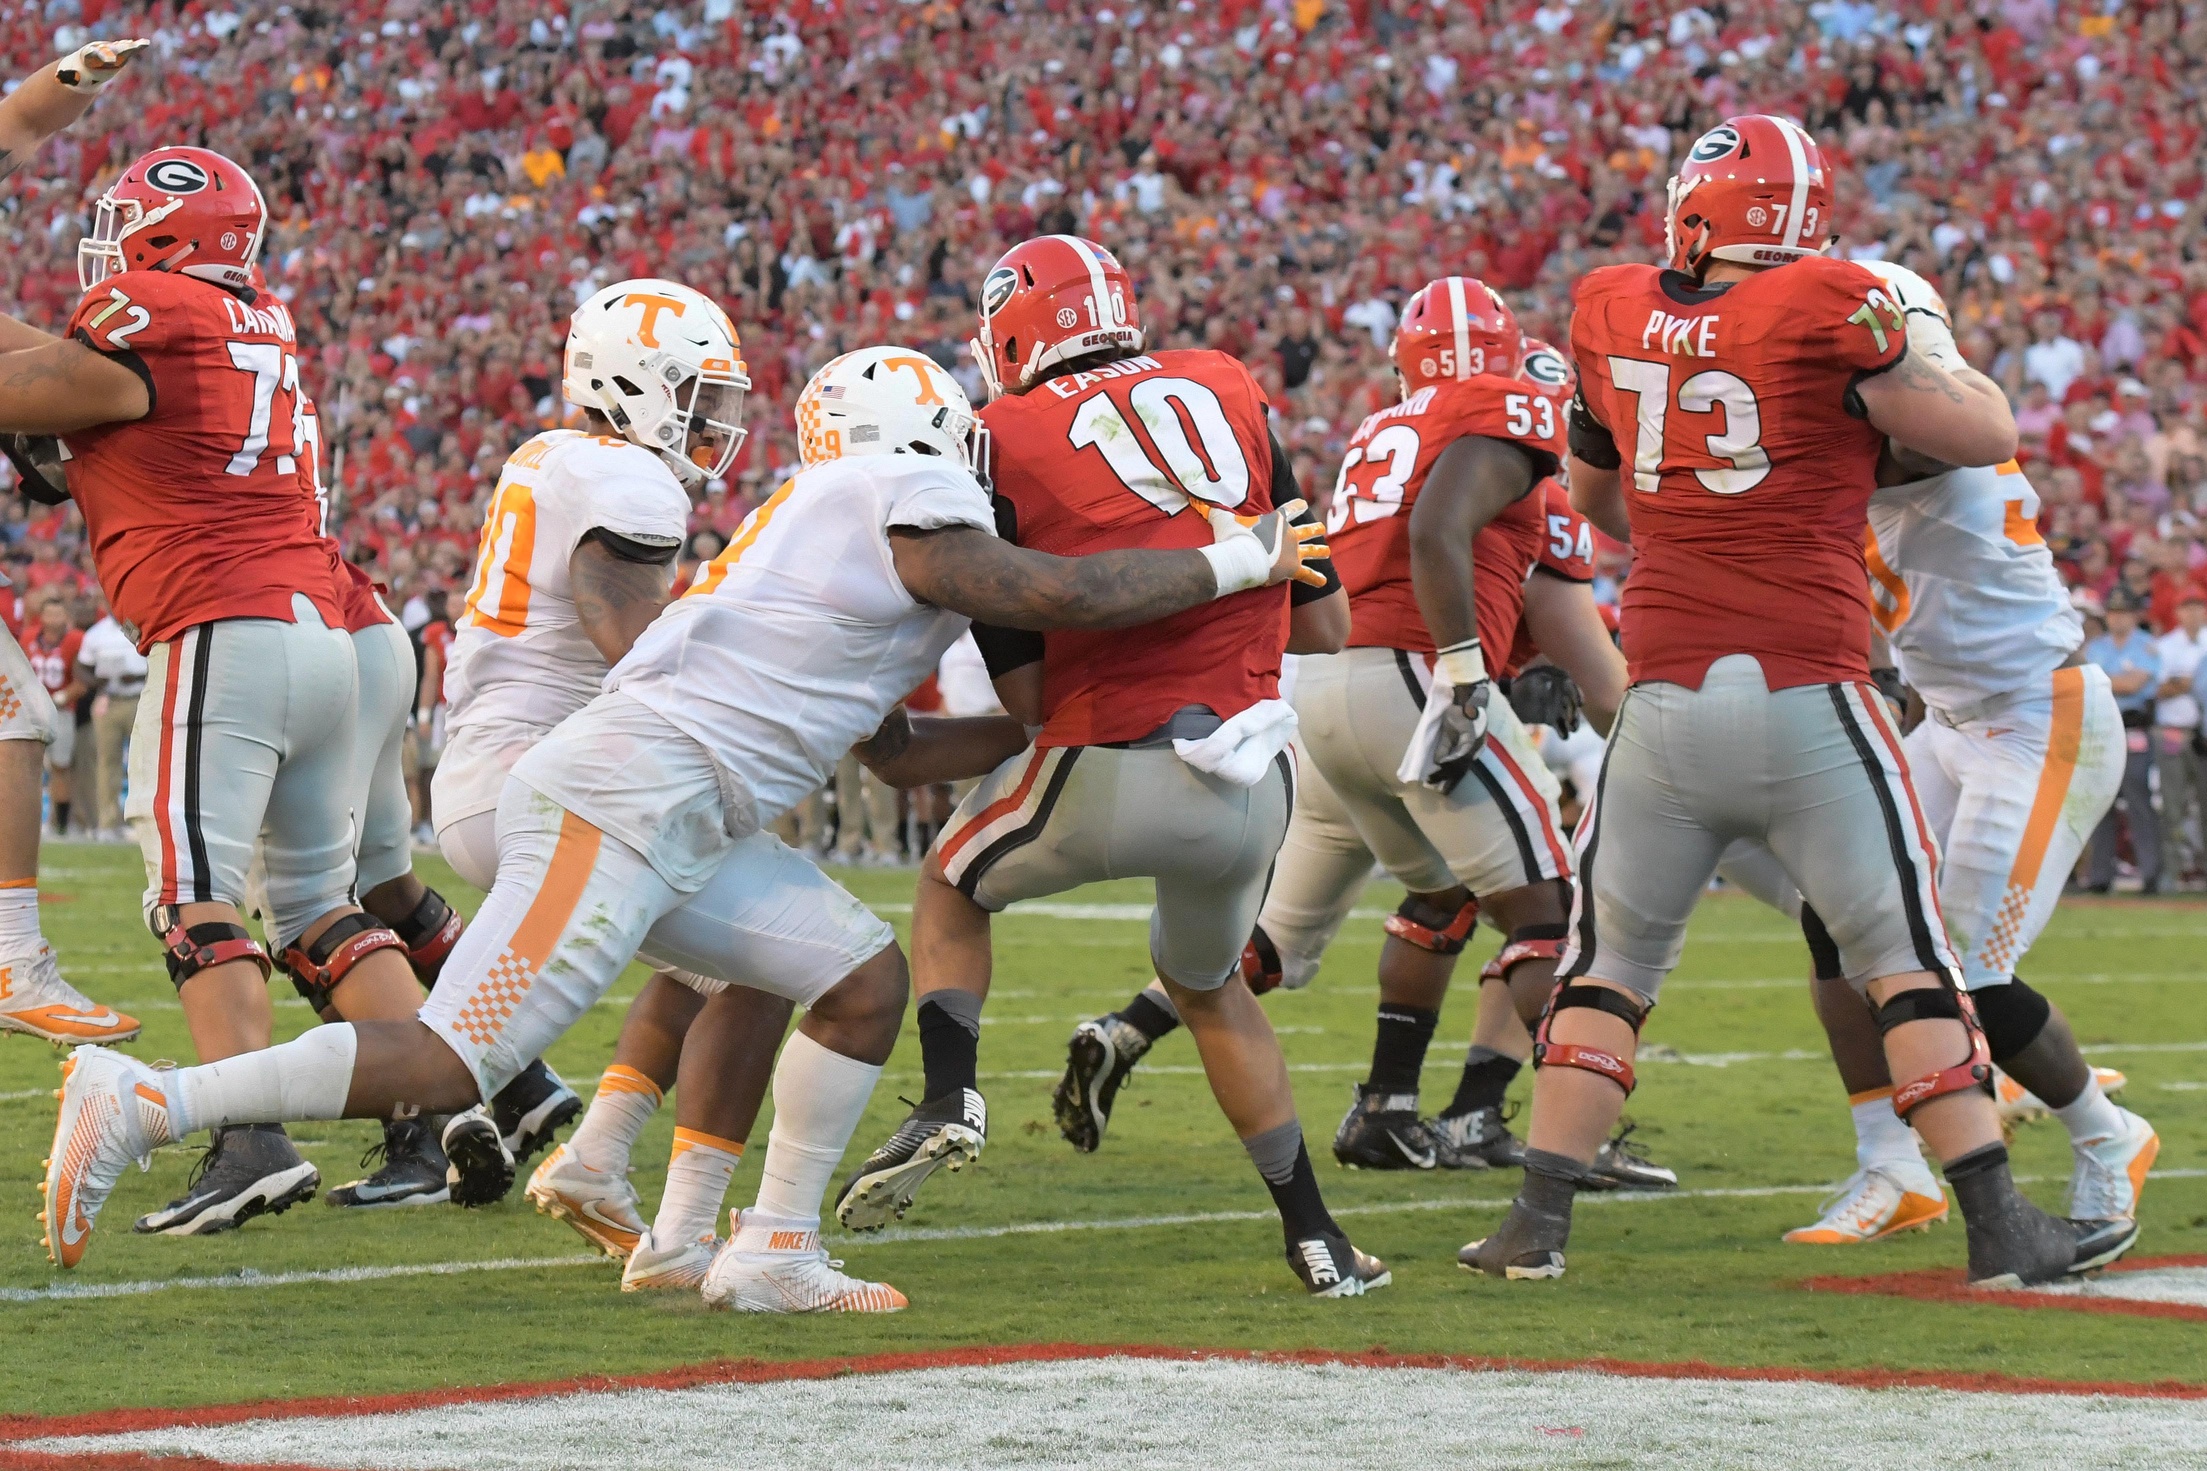 Oct 1, 2016; Athens, GA, USA; Tennessee Volunteers defensive end Derek Barnett (9) hits Georgia Bulldogs quarterback Jacob Eason (10) causing a fumble recovered by Tennessee for a touchdown during the fourth quarter at Sanford Stadium. Tennessee defeated Georgia 34-31. Mandatory Credit: Dale Zanine-USA TODAY Sports